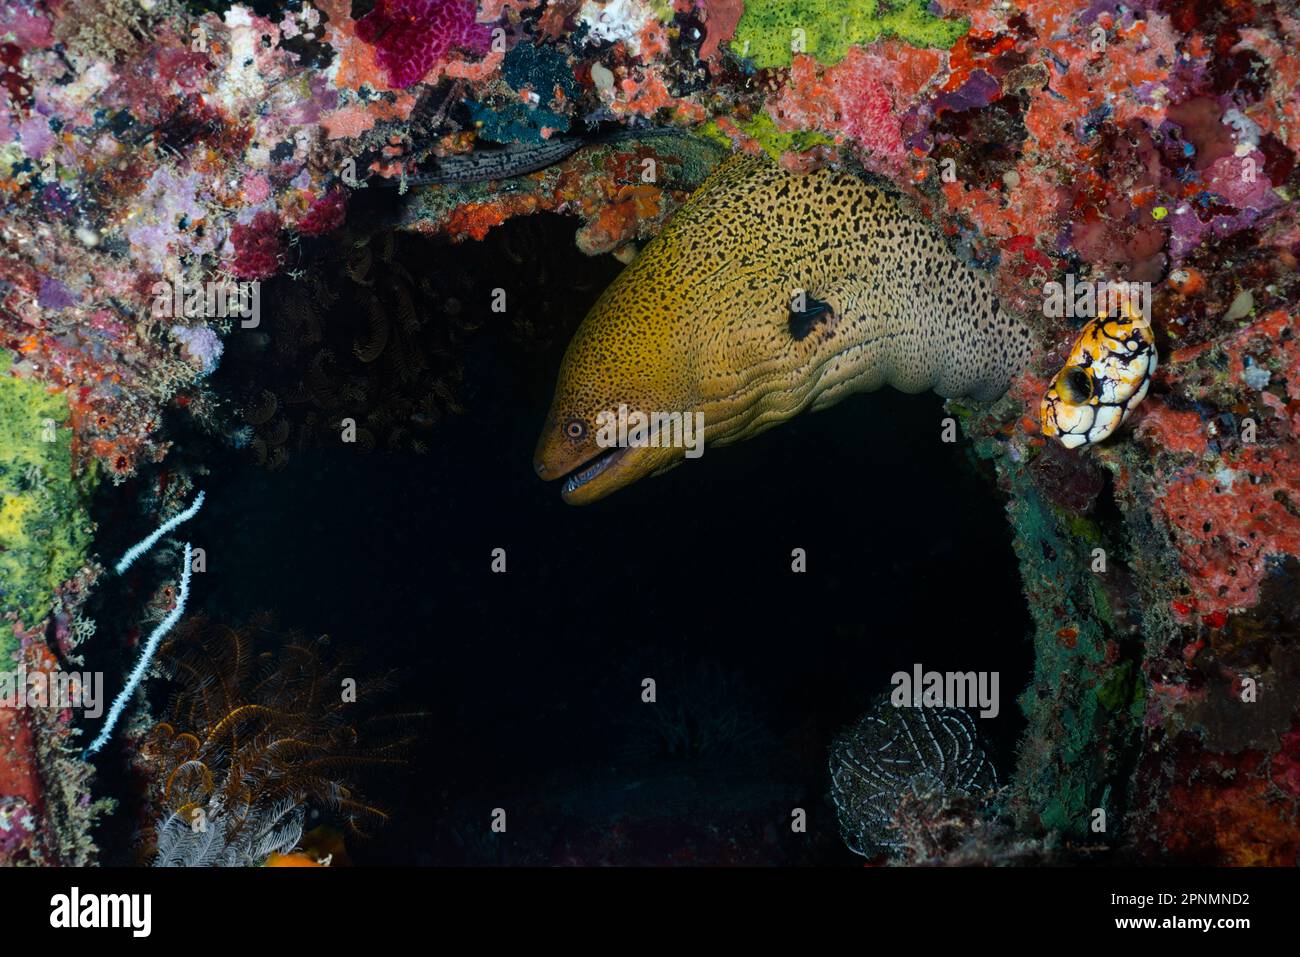 A yellow moray eel peeks out of coral reef Stock Photo